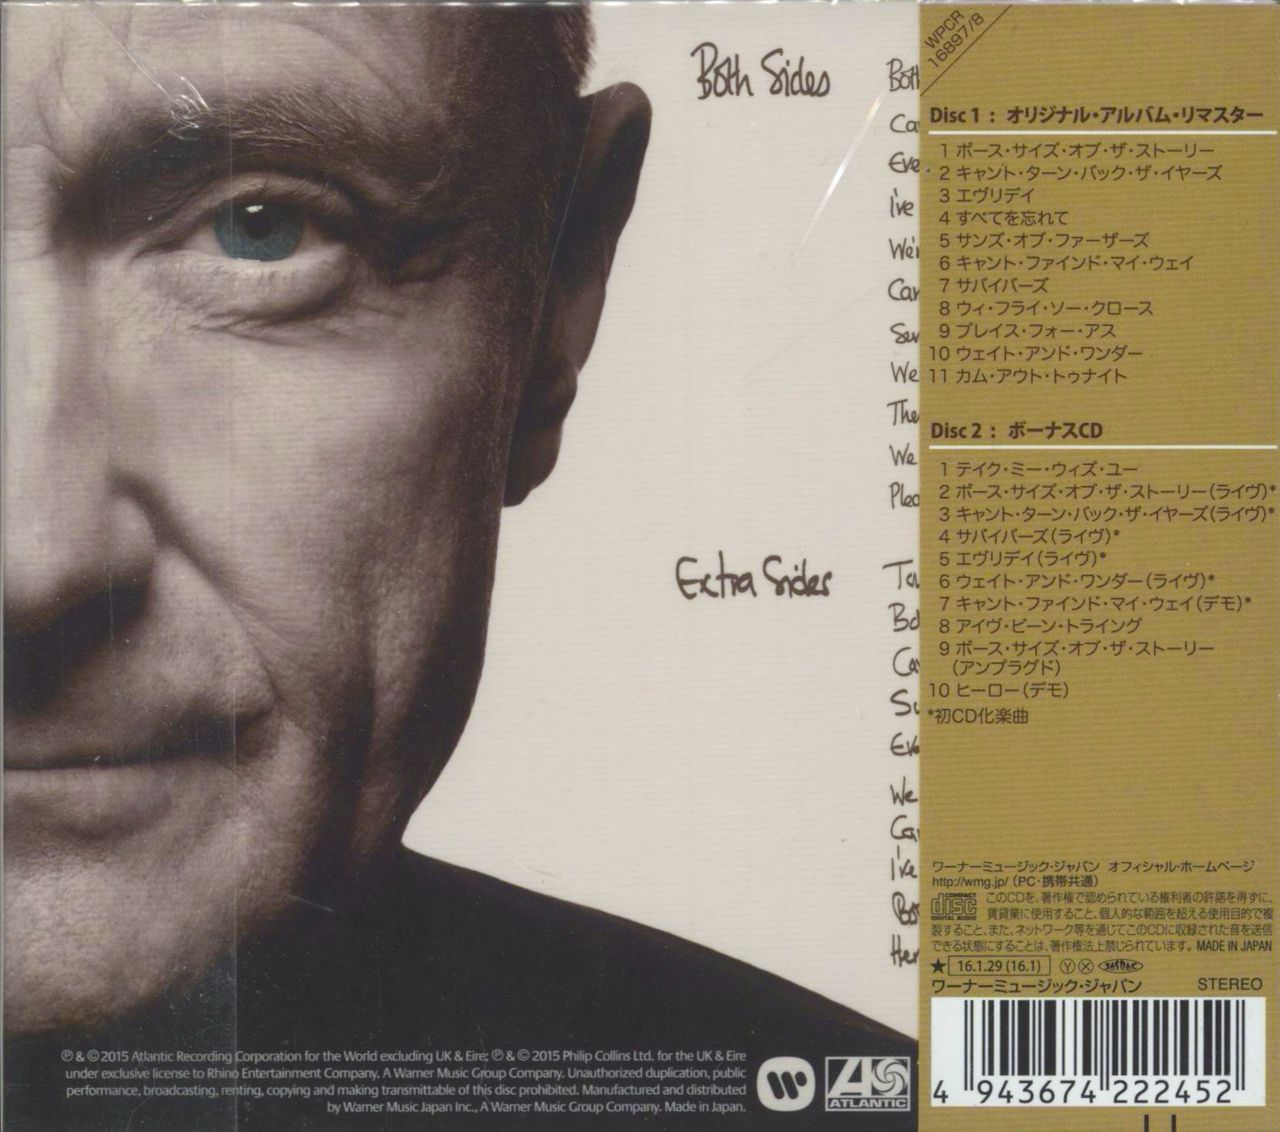 Phil Collins Both Sides - Deluxe Edition Japanese 2-CD album set